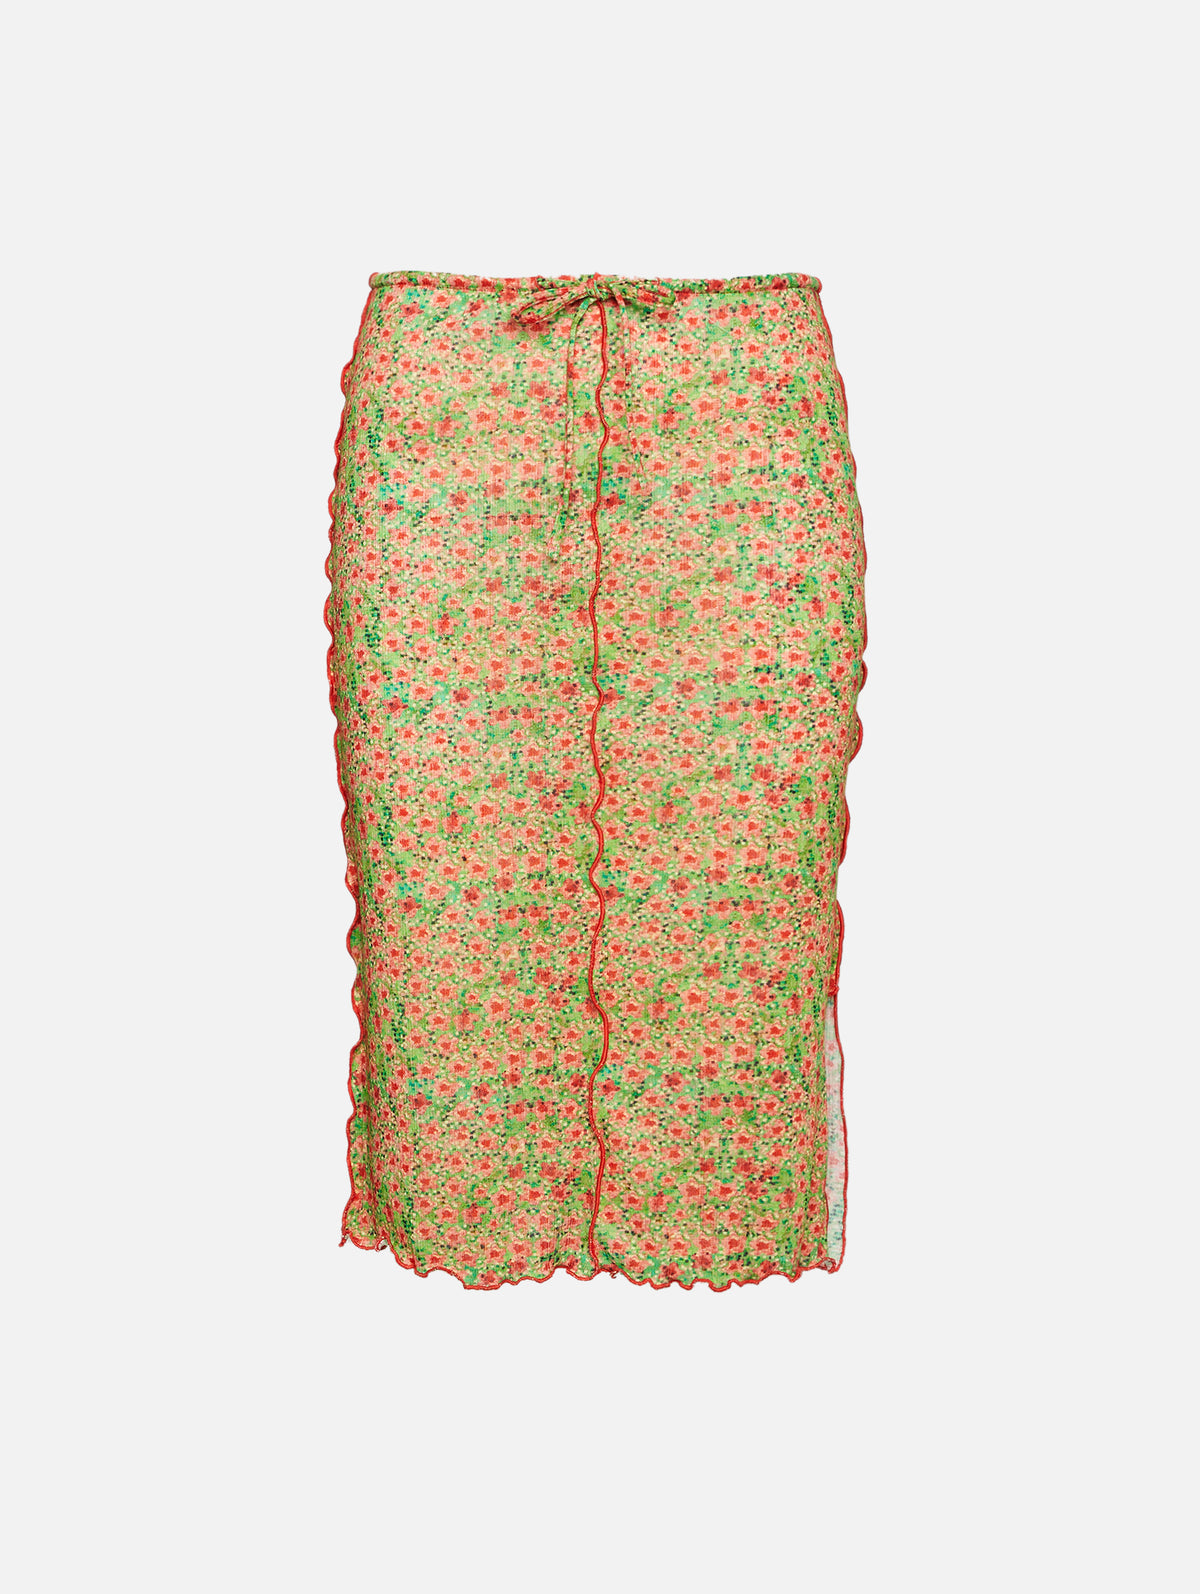 view 1 - Joa Floral Knit Skirt